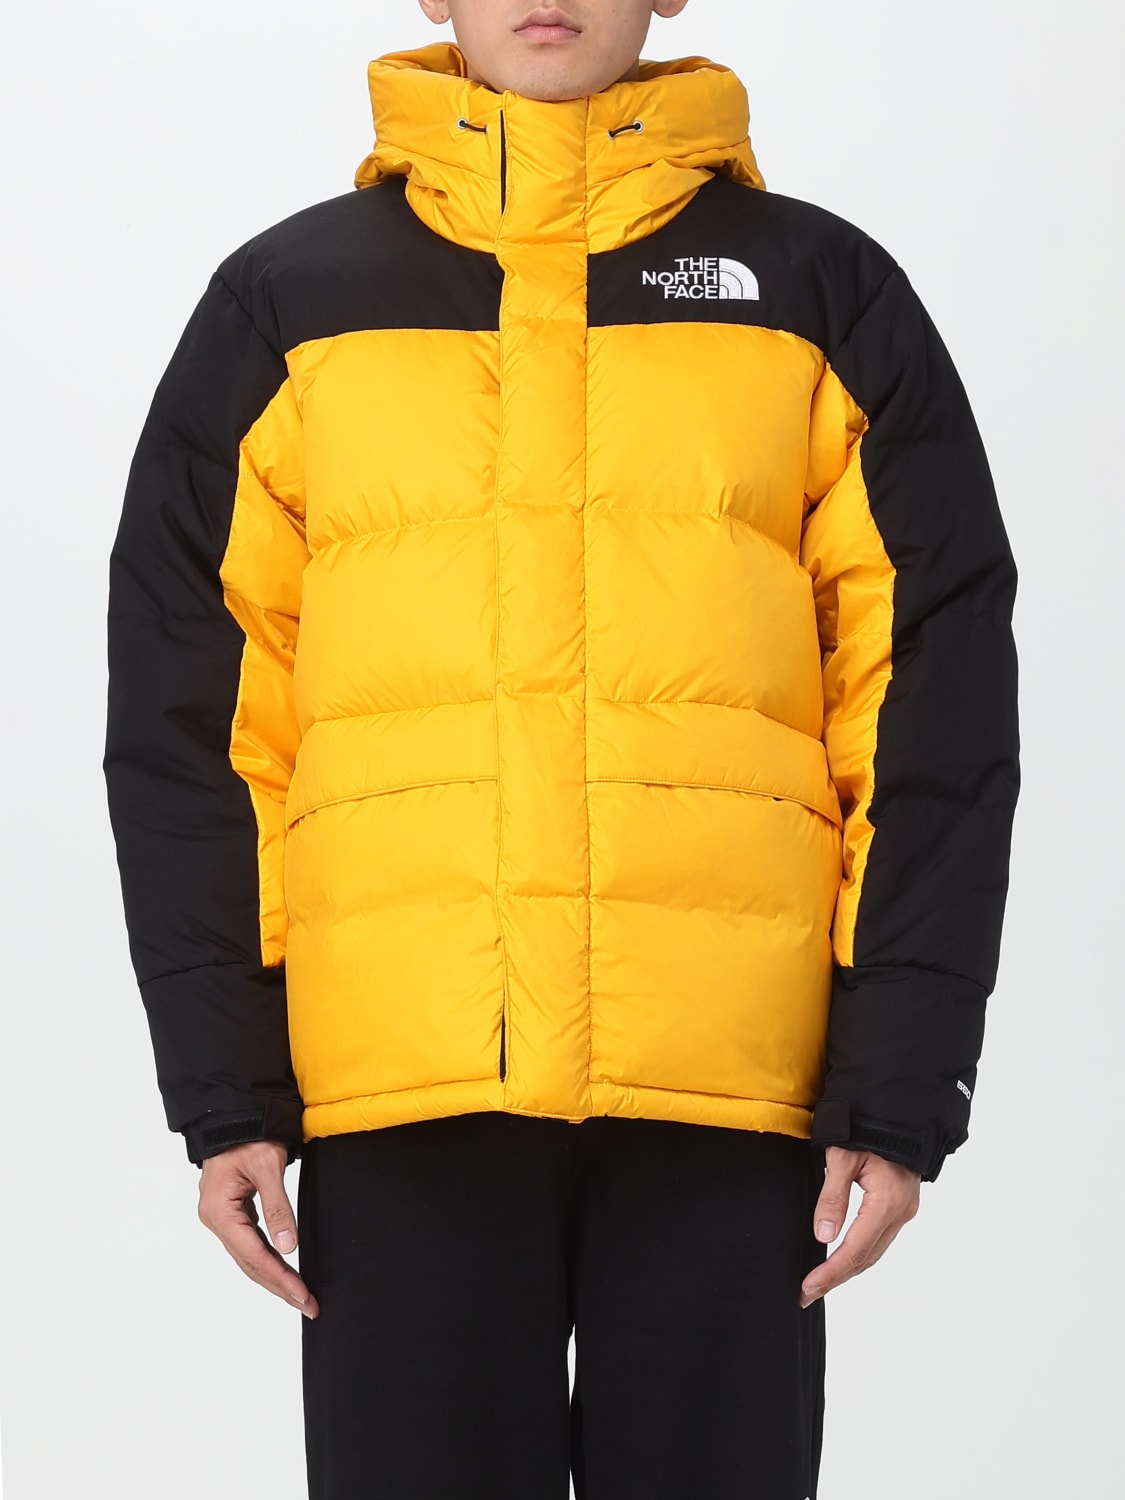  THE NORTH FACE